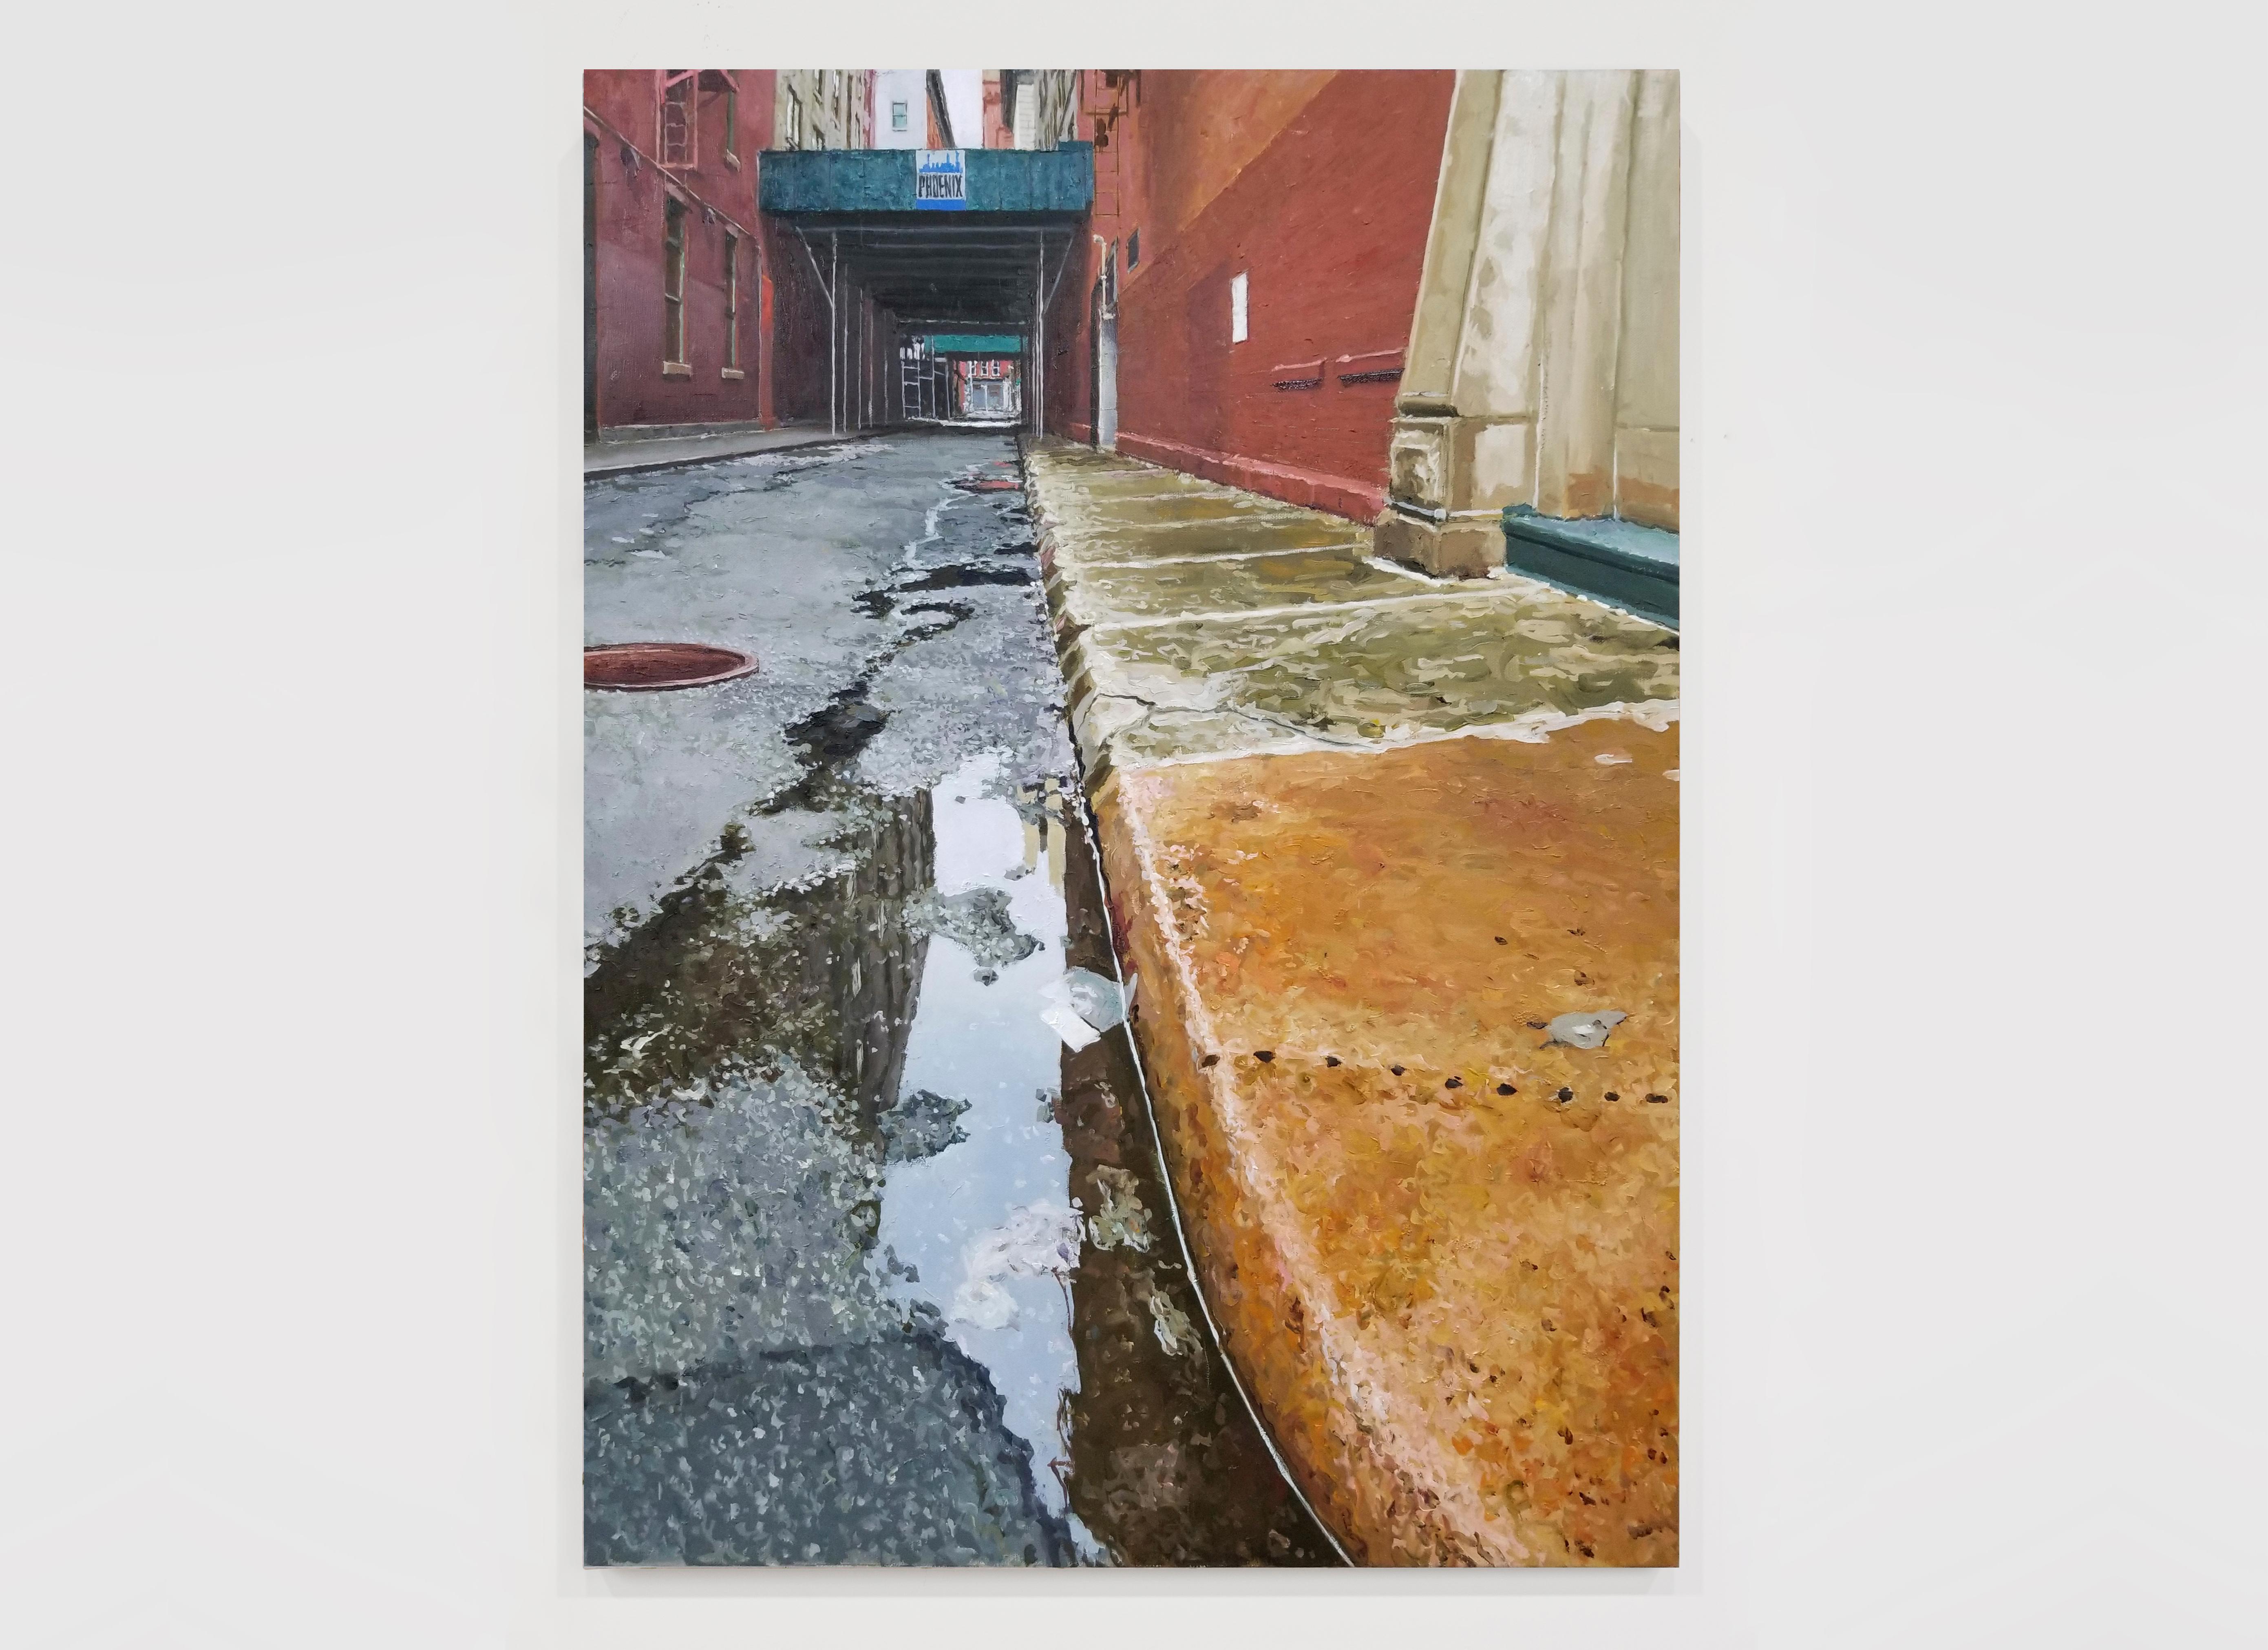 THE MORNING AFTER, street corner, new york city, puddle, cityscape, realism - Painting by Richard Combes